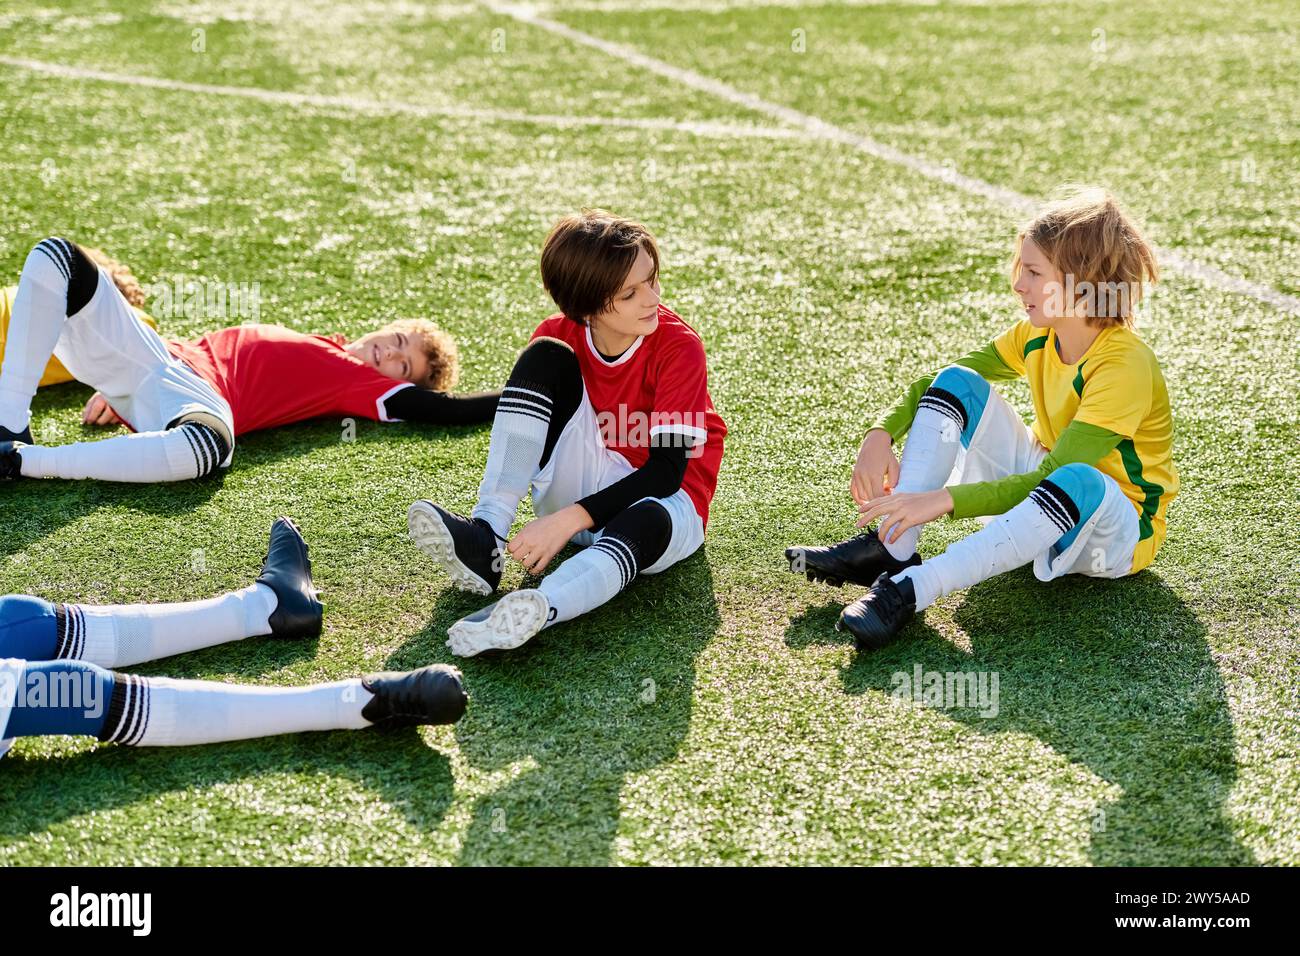 A group of young children gleefully sit atop a vibrant soccer field, chatting and laughing. Their bright energy and playful spirit fill the space with Stock Photo